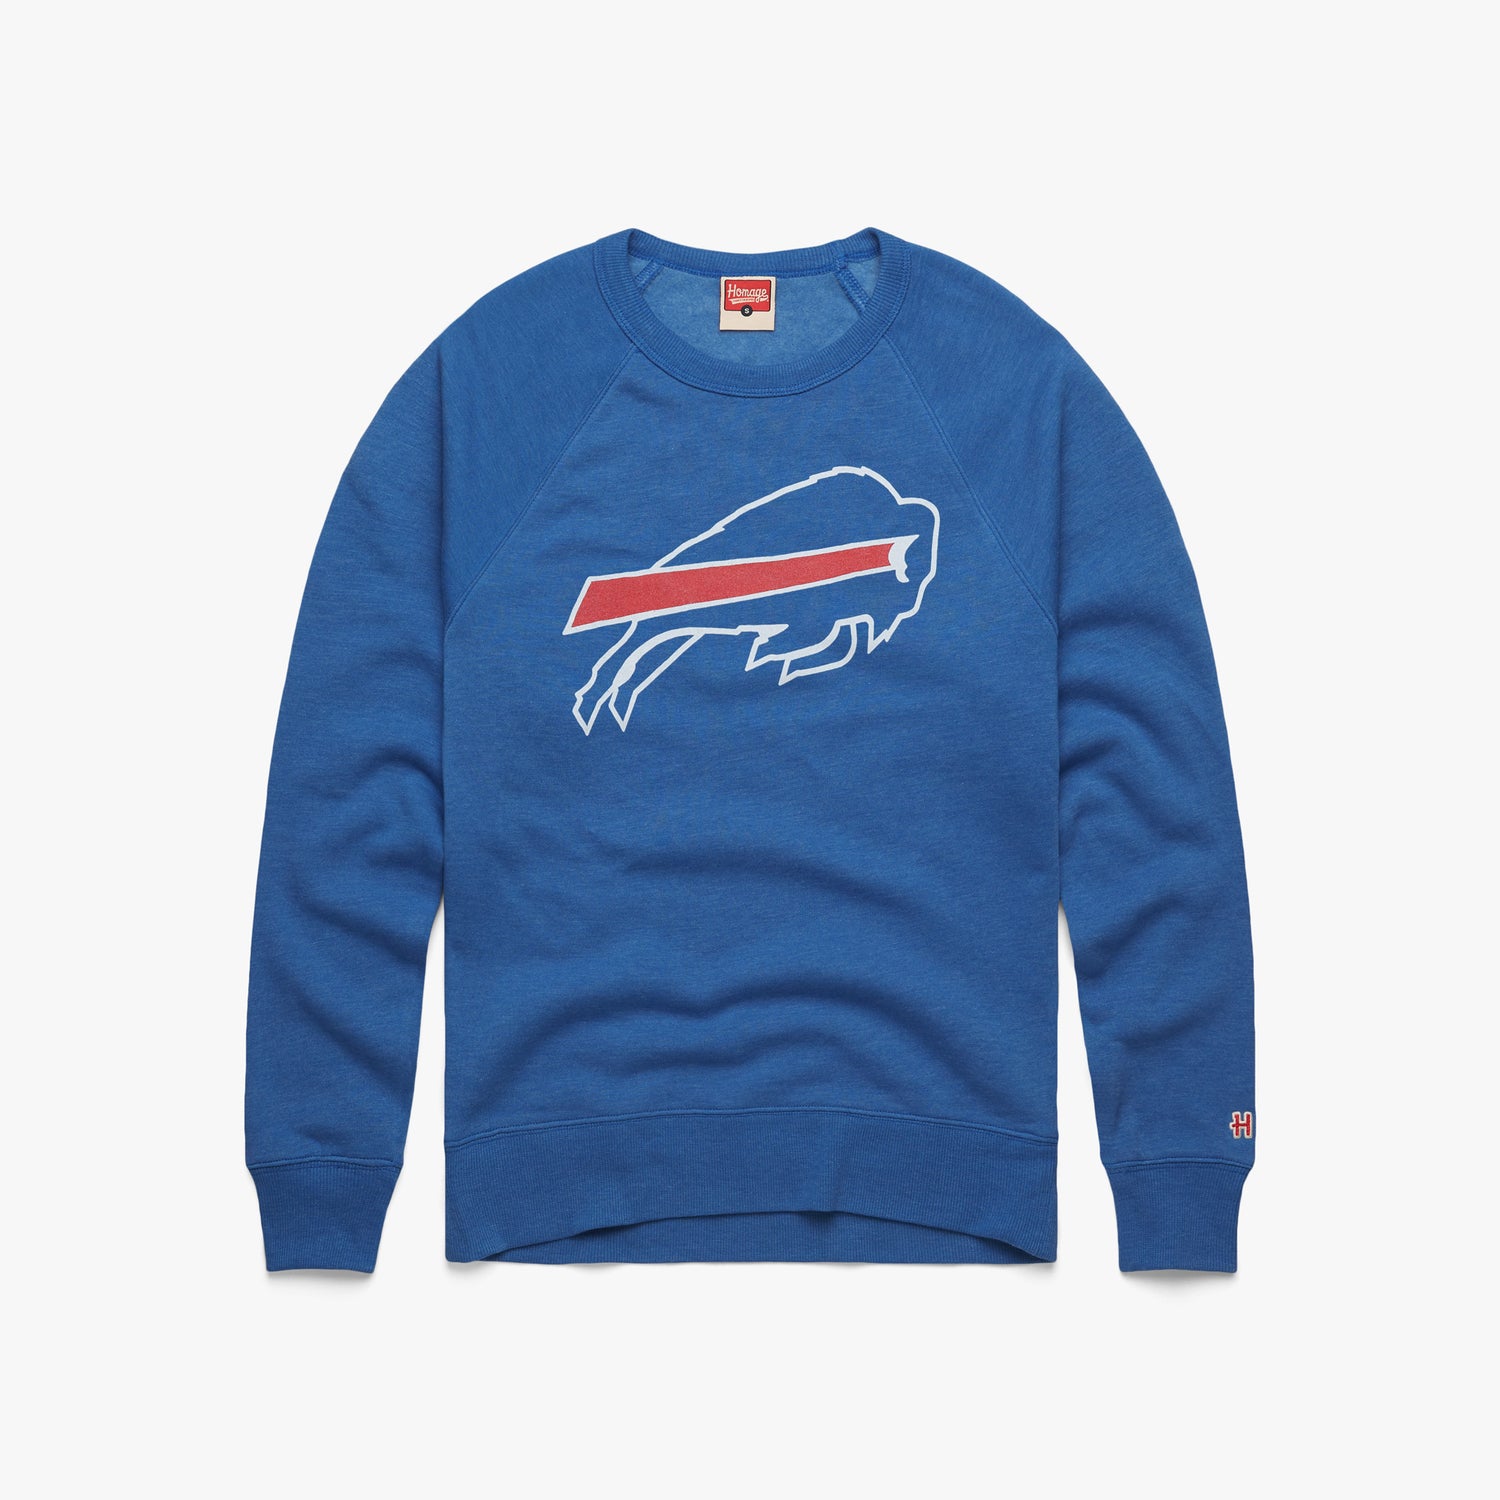 Buffalo Bills '74 Crewneck from Homage. | Officially Licensed Vintage NFL Apparel from Homage Pro Shop.